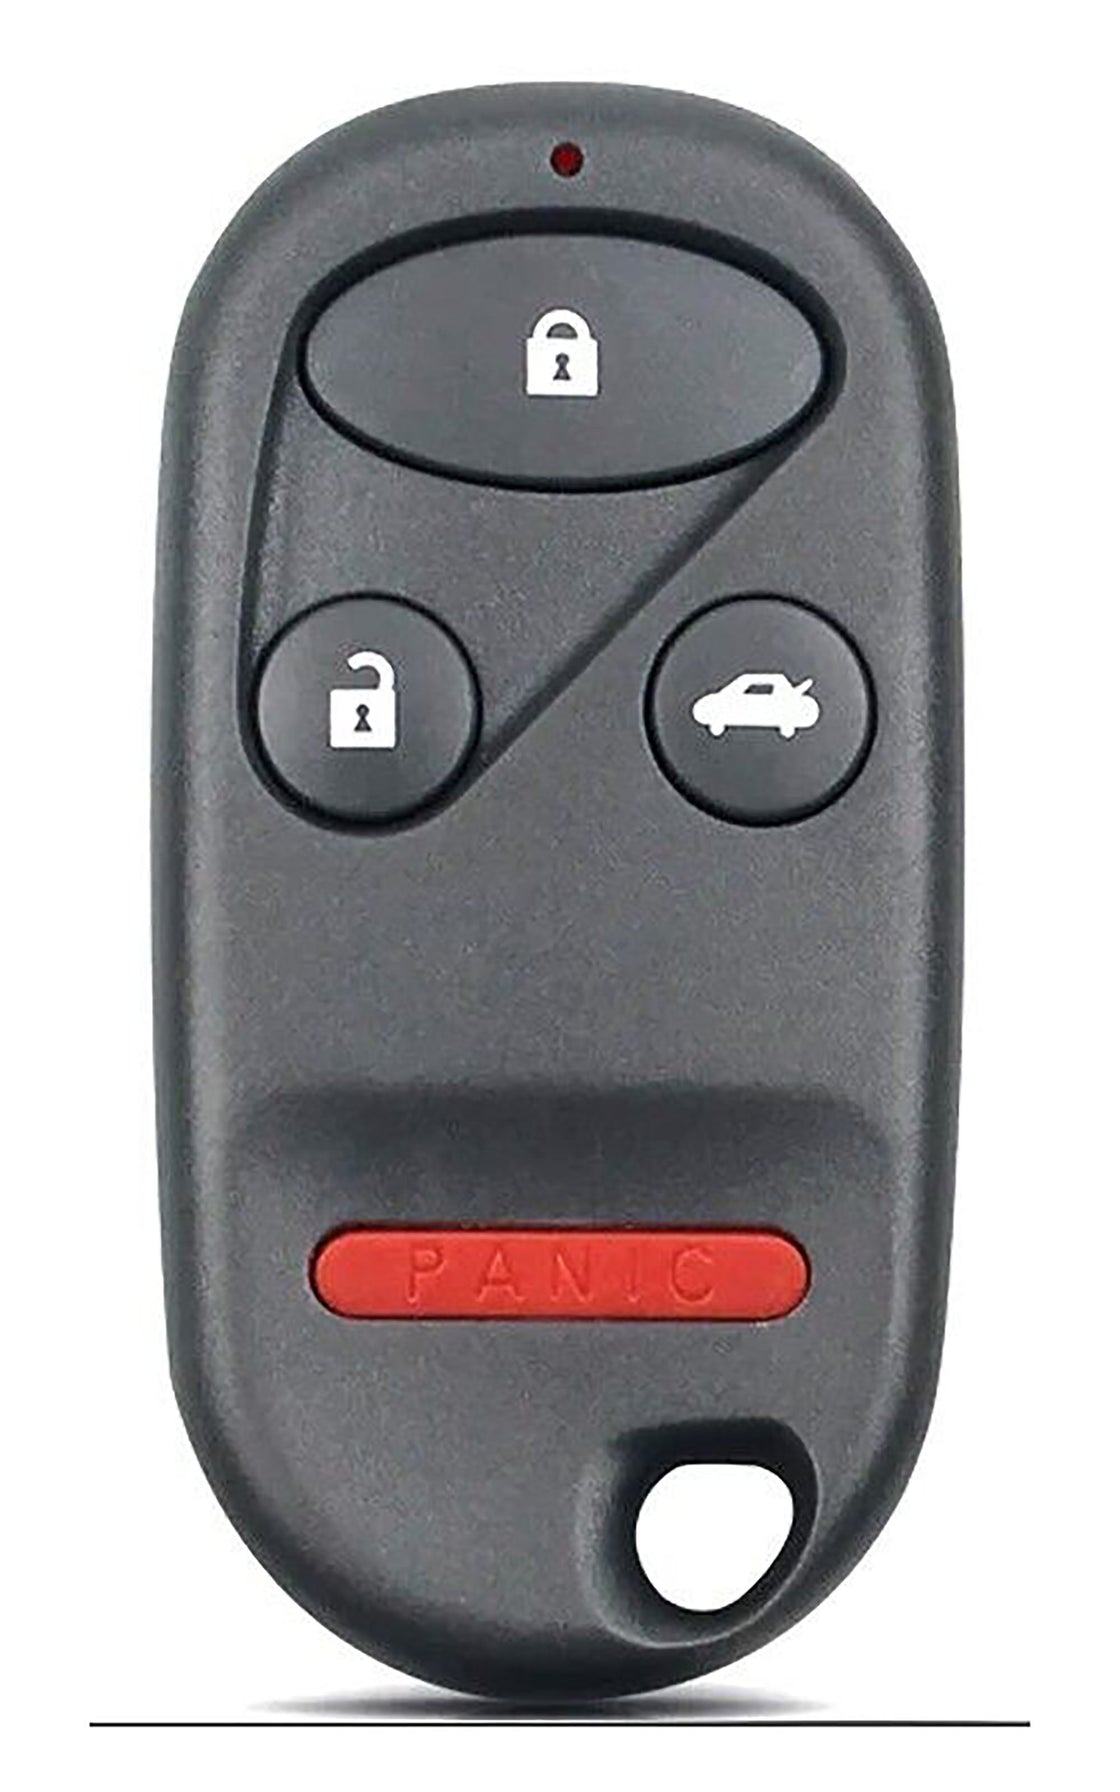 1994 Acura Integra Replacement Key Fob Remote